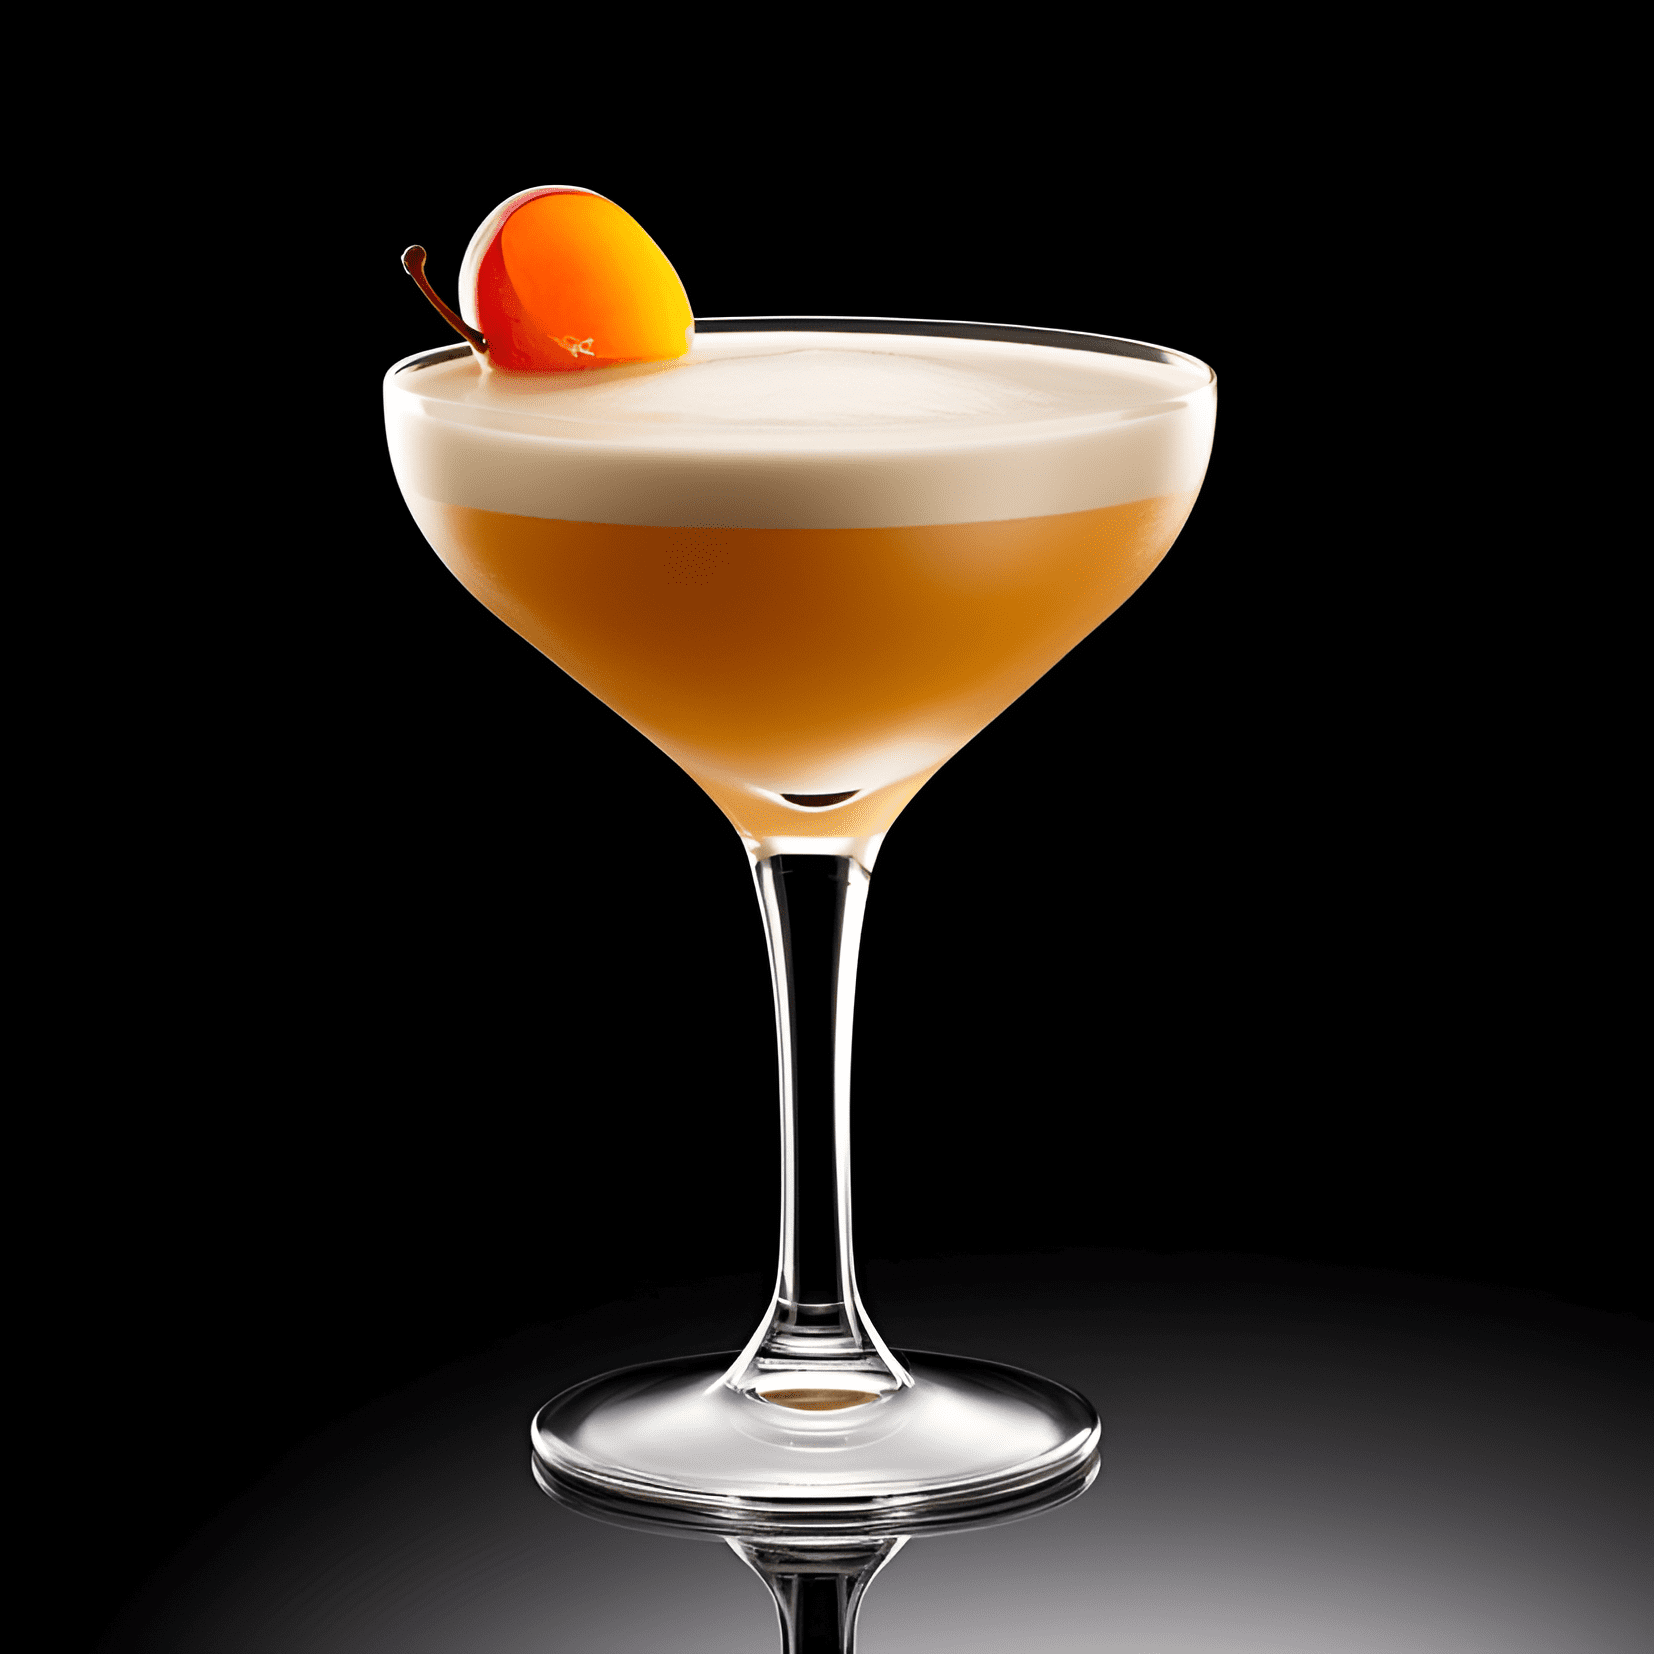 Apricot Lady Cocktail Recipe - The Apricot Lady is a delightful mix of sweet, sour, and fruity flavors. The apricot brandy adds a rich, fruity sweetness, while the lemon juice provides a refreshing tang. The orange liqueur adds a hint of citrus, and the egg white gives the cocktail a smooth, creamy texture.